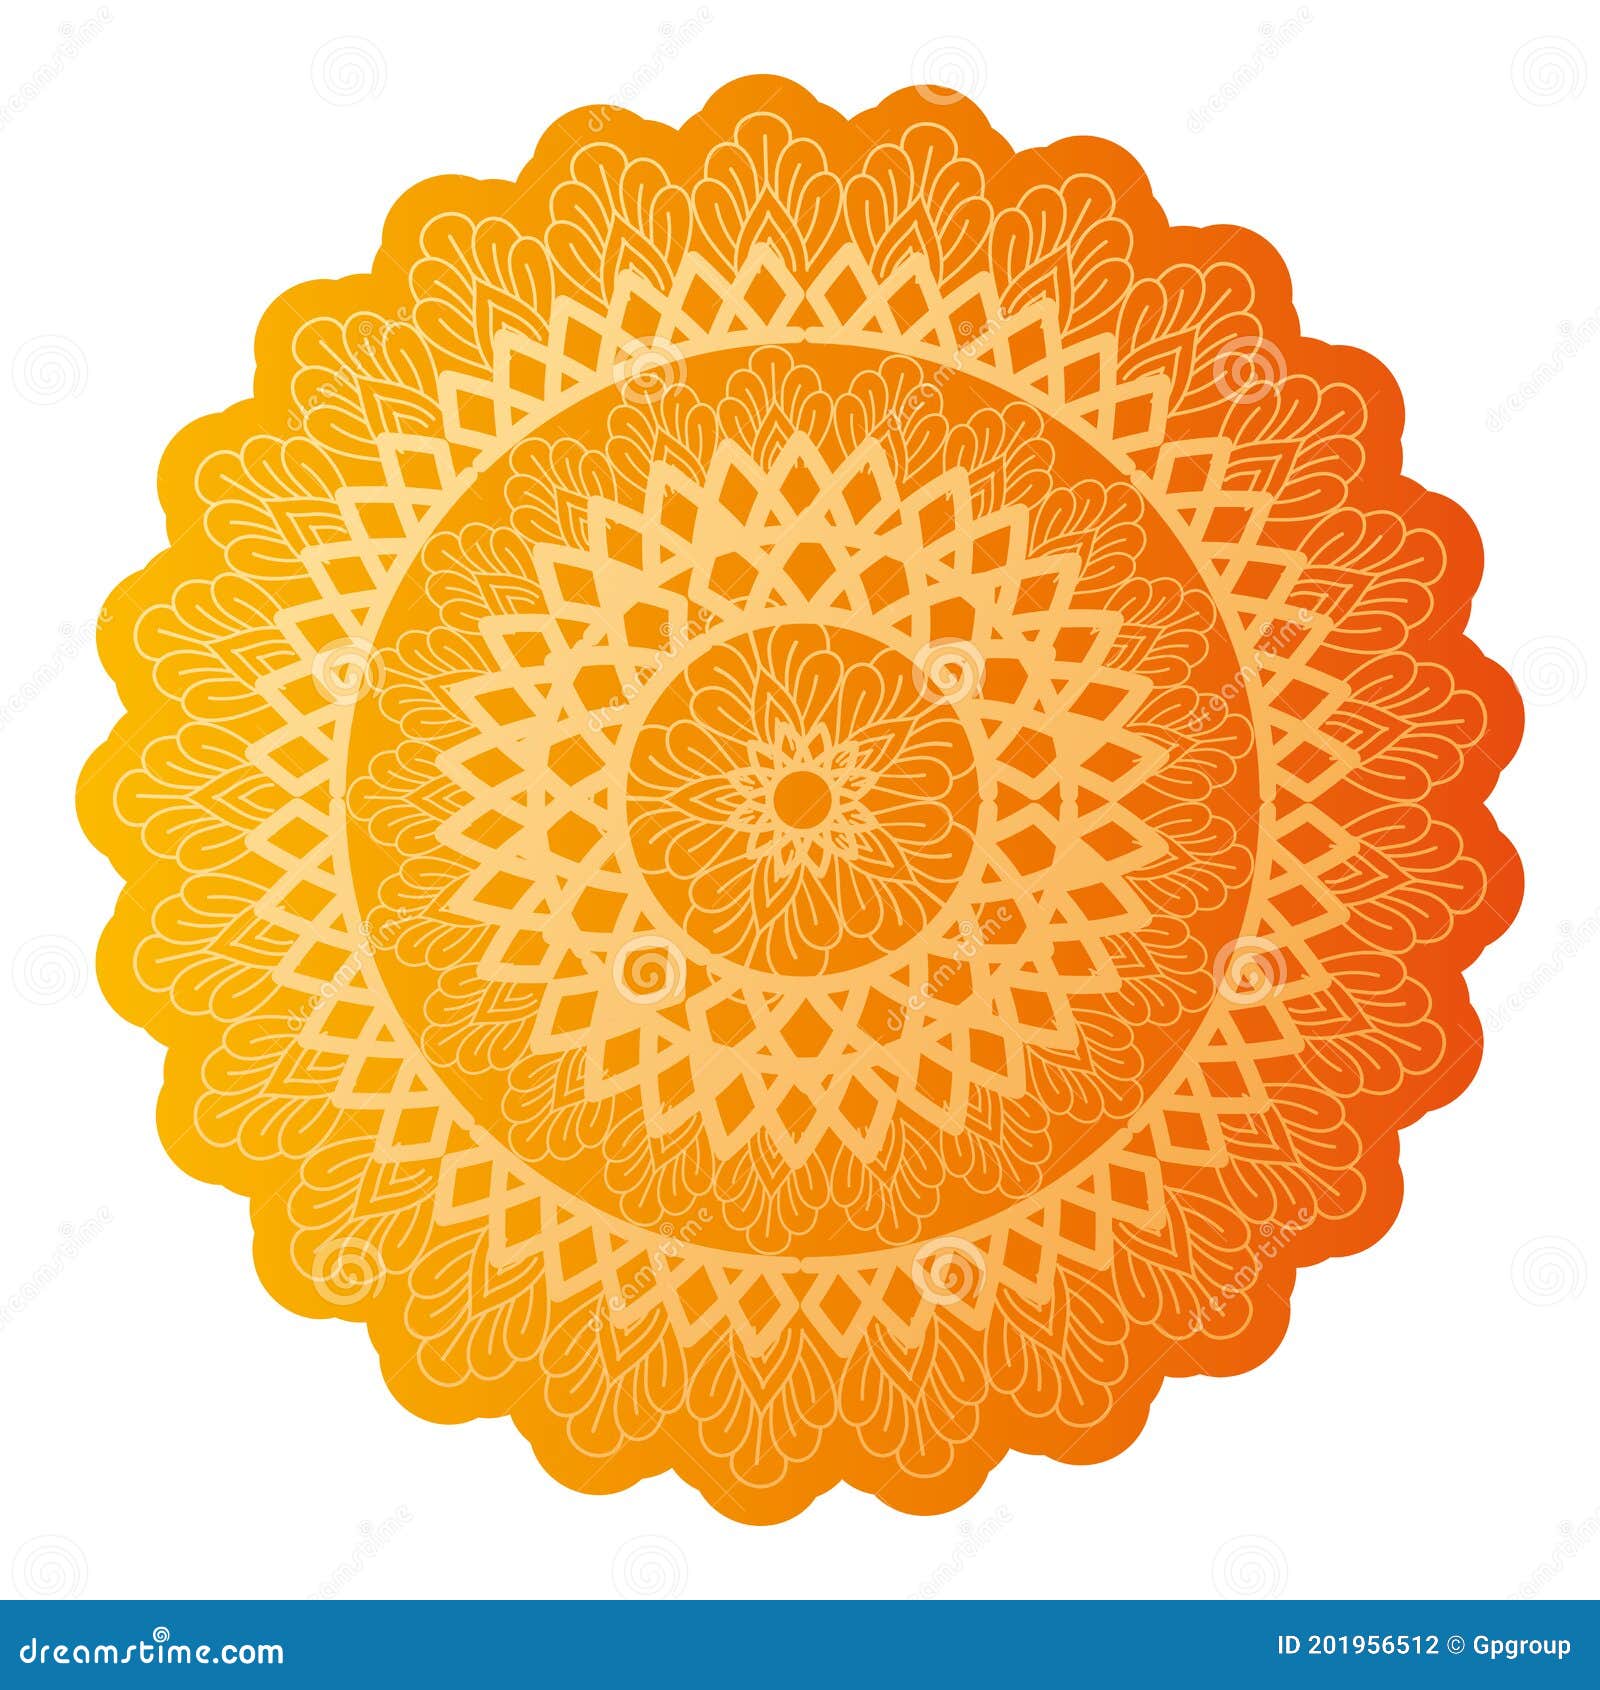 mandala of color orange tiger with a white background